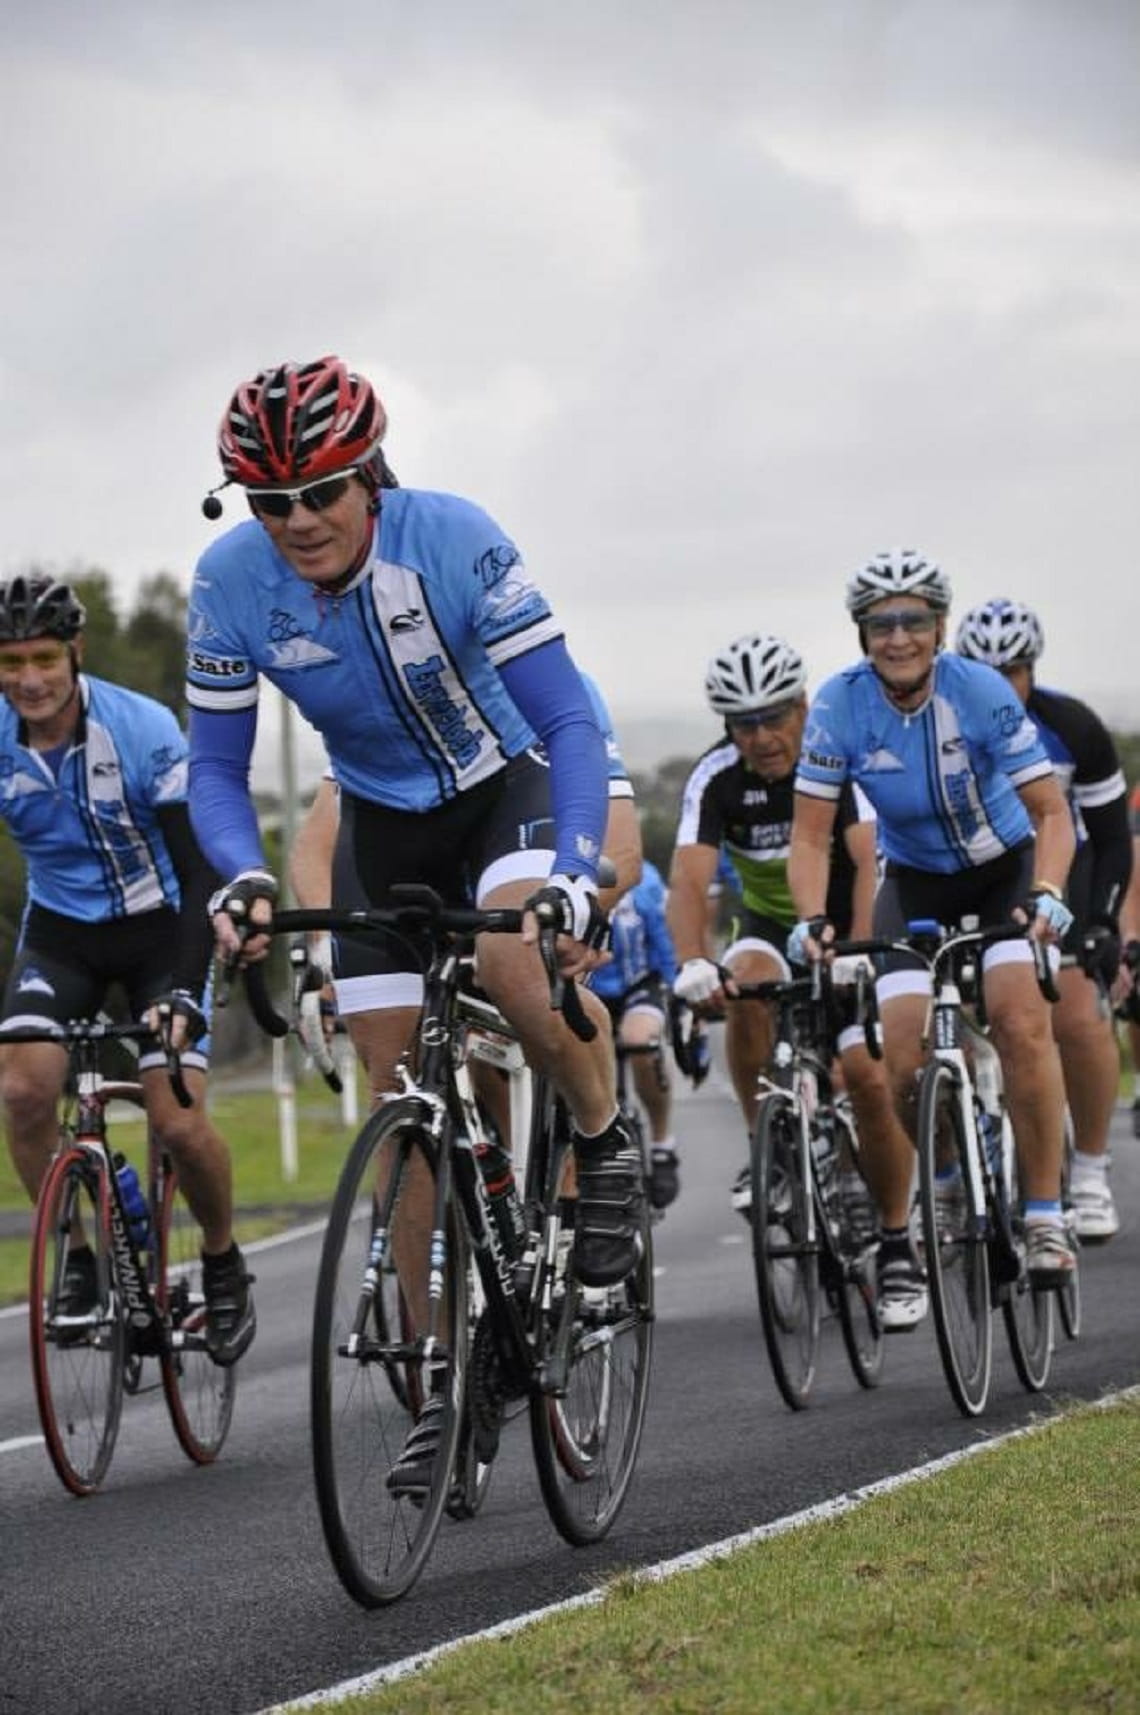 Brian cycling with the Inverloch Coastal Crewzers